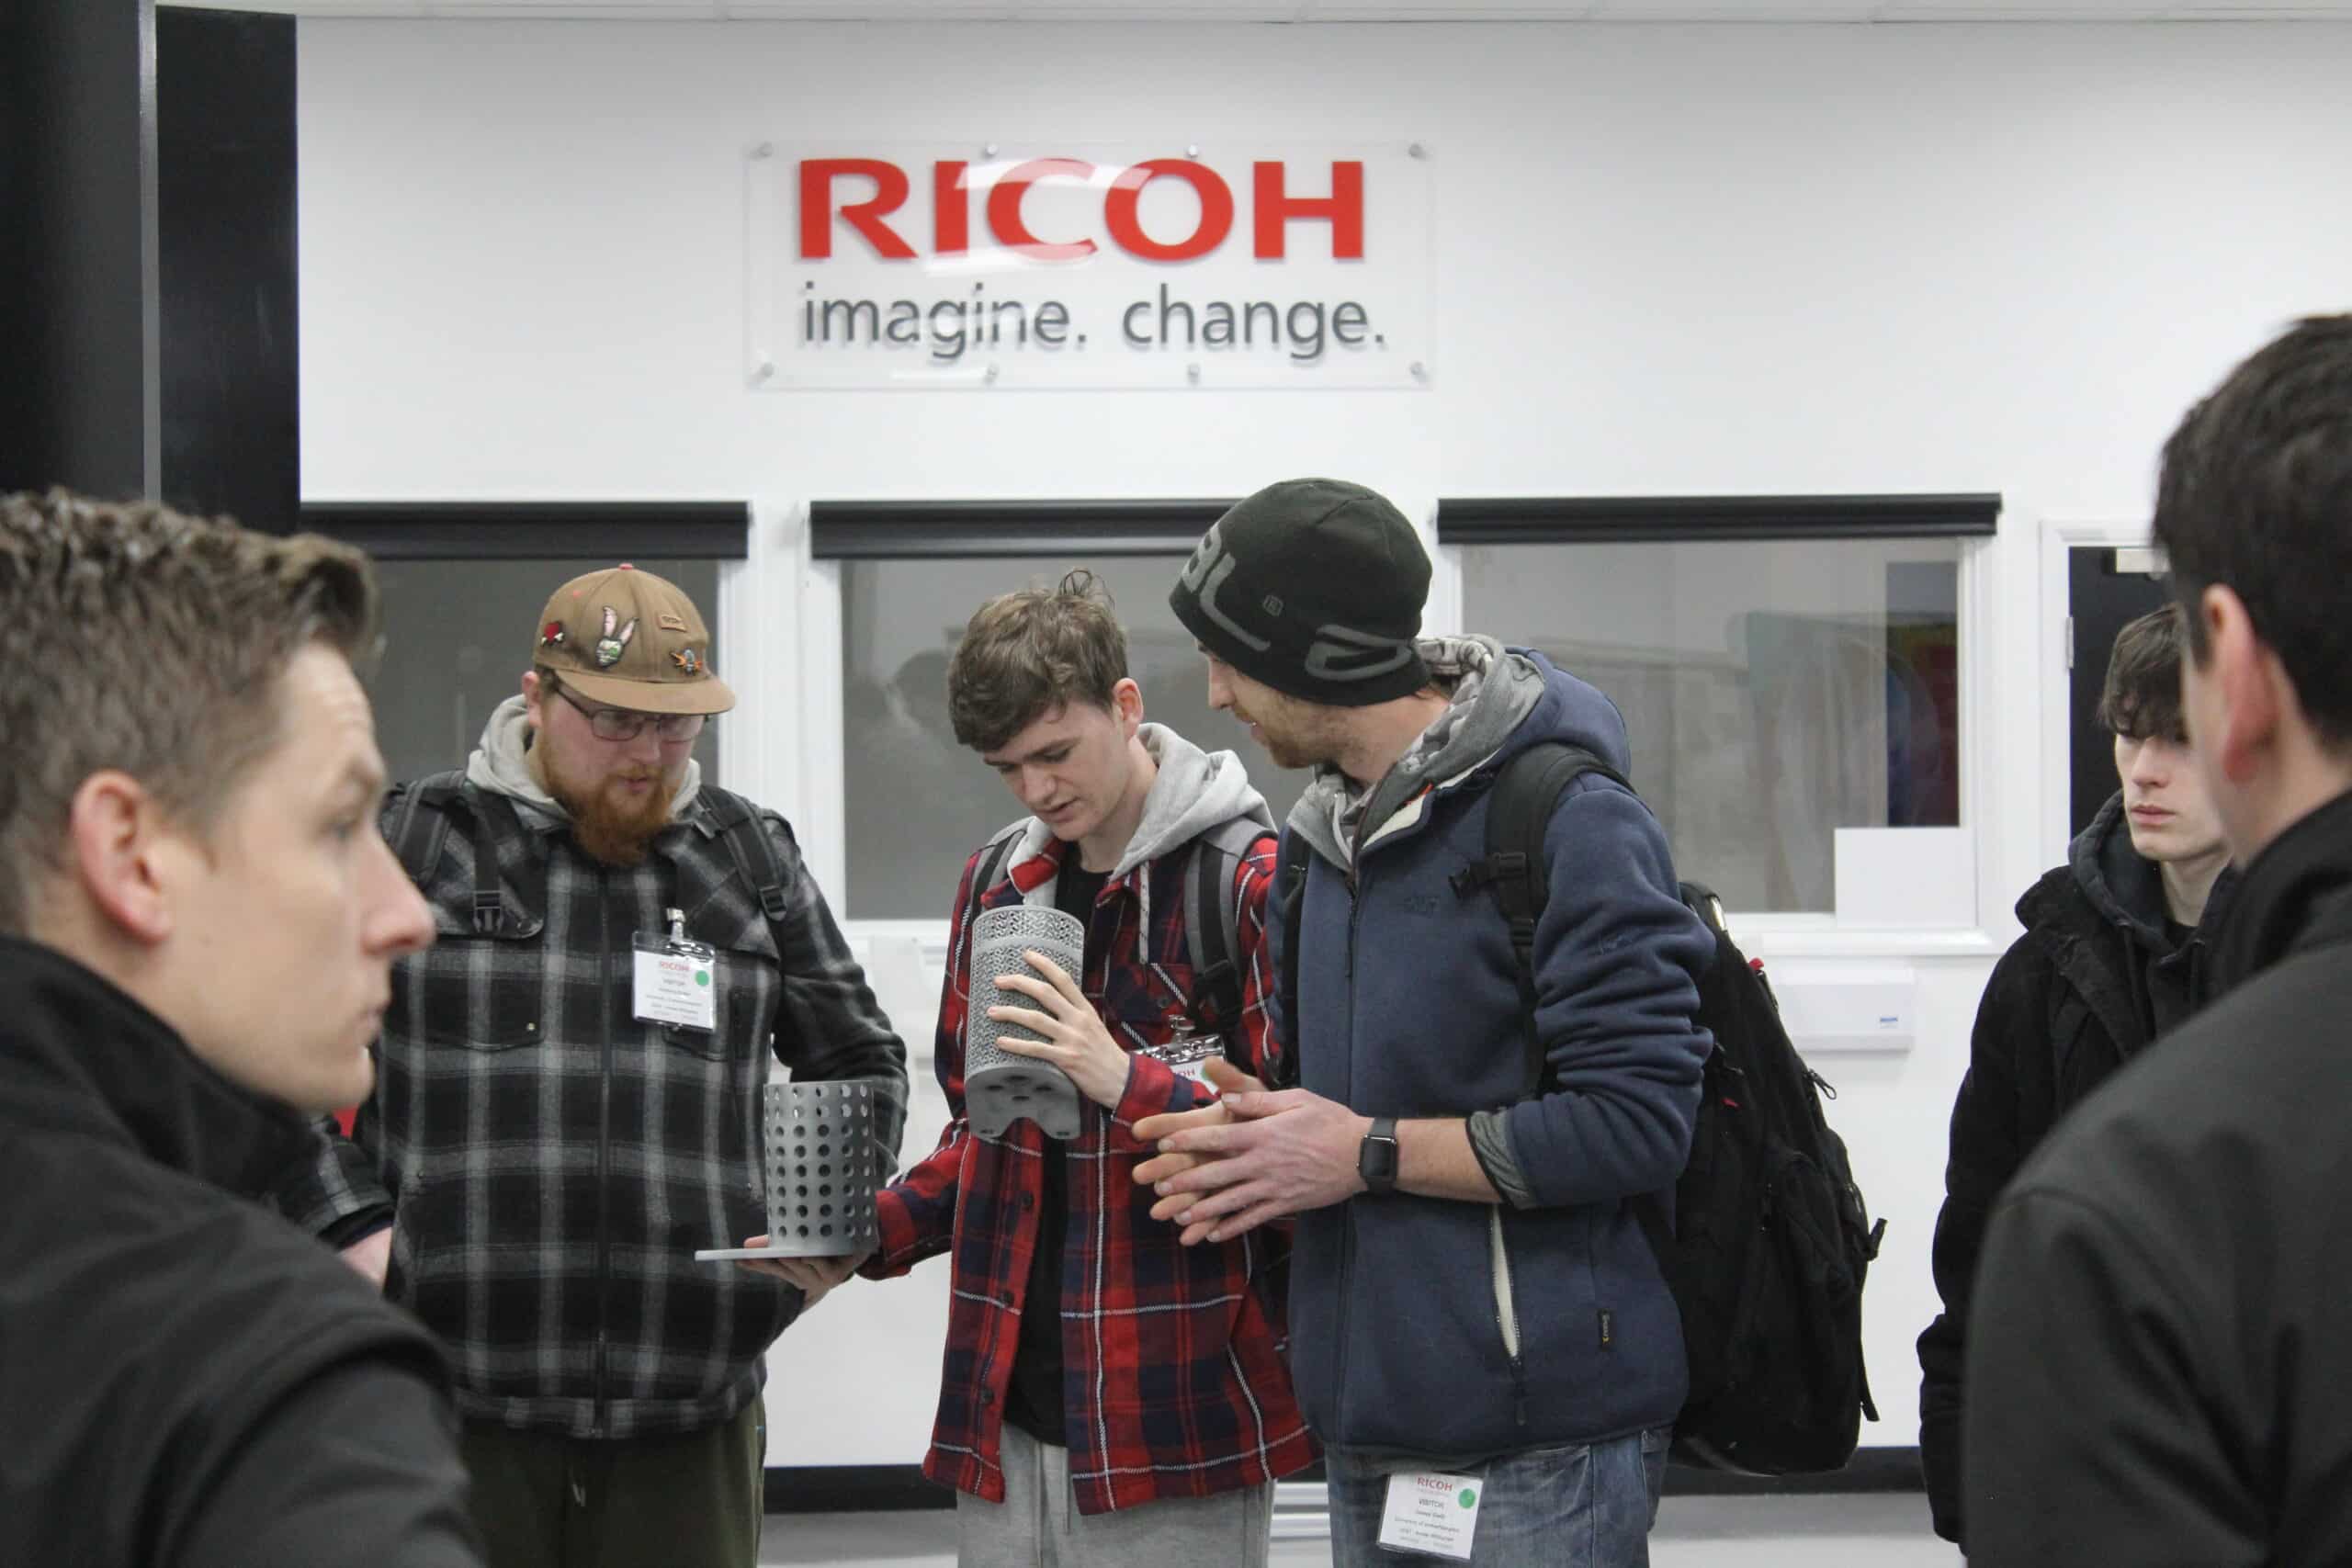 Students at Ricoh Event